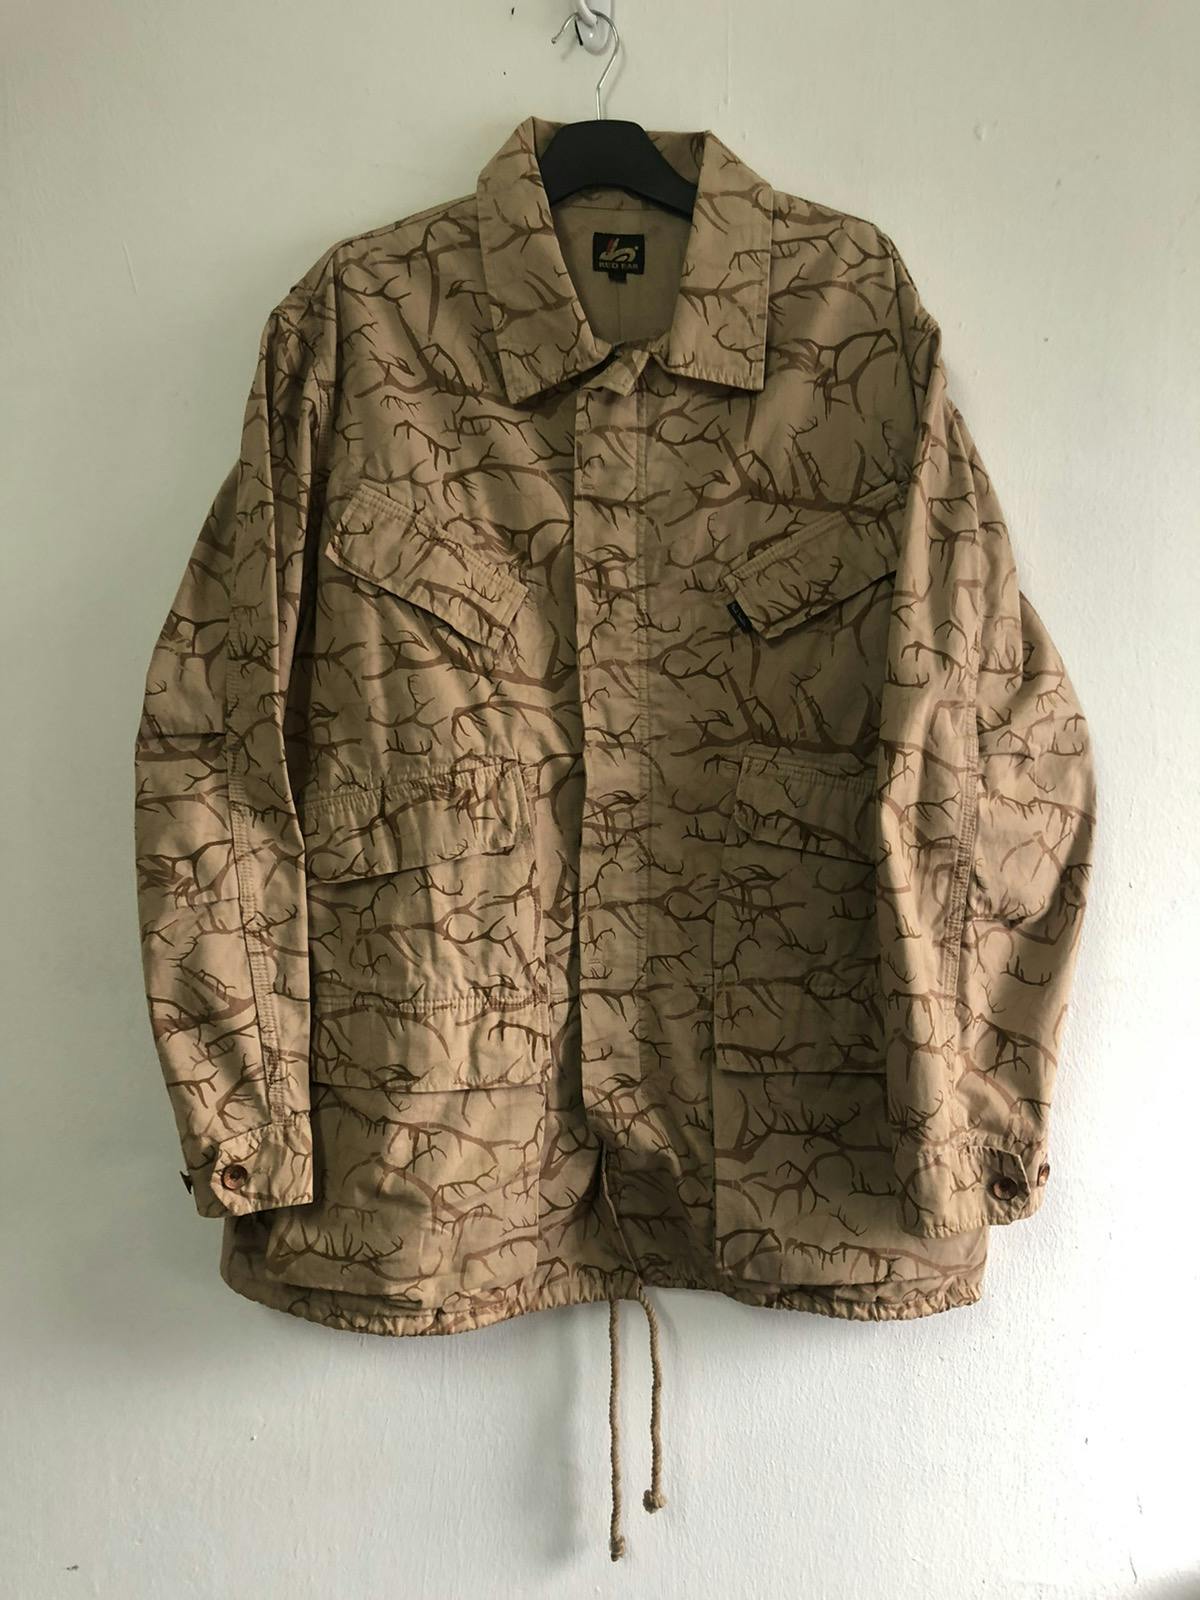 RED EAR Paul Smith Military Jacket - 1